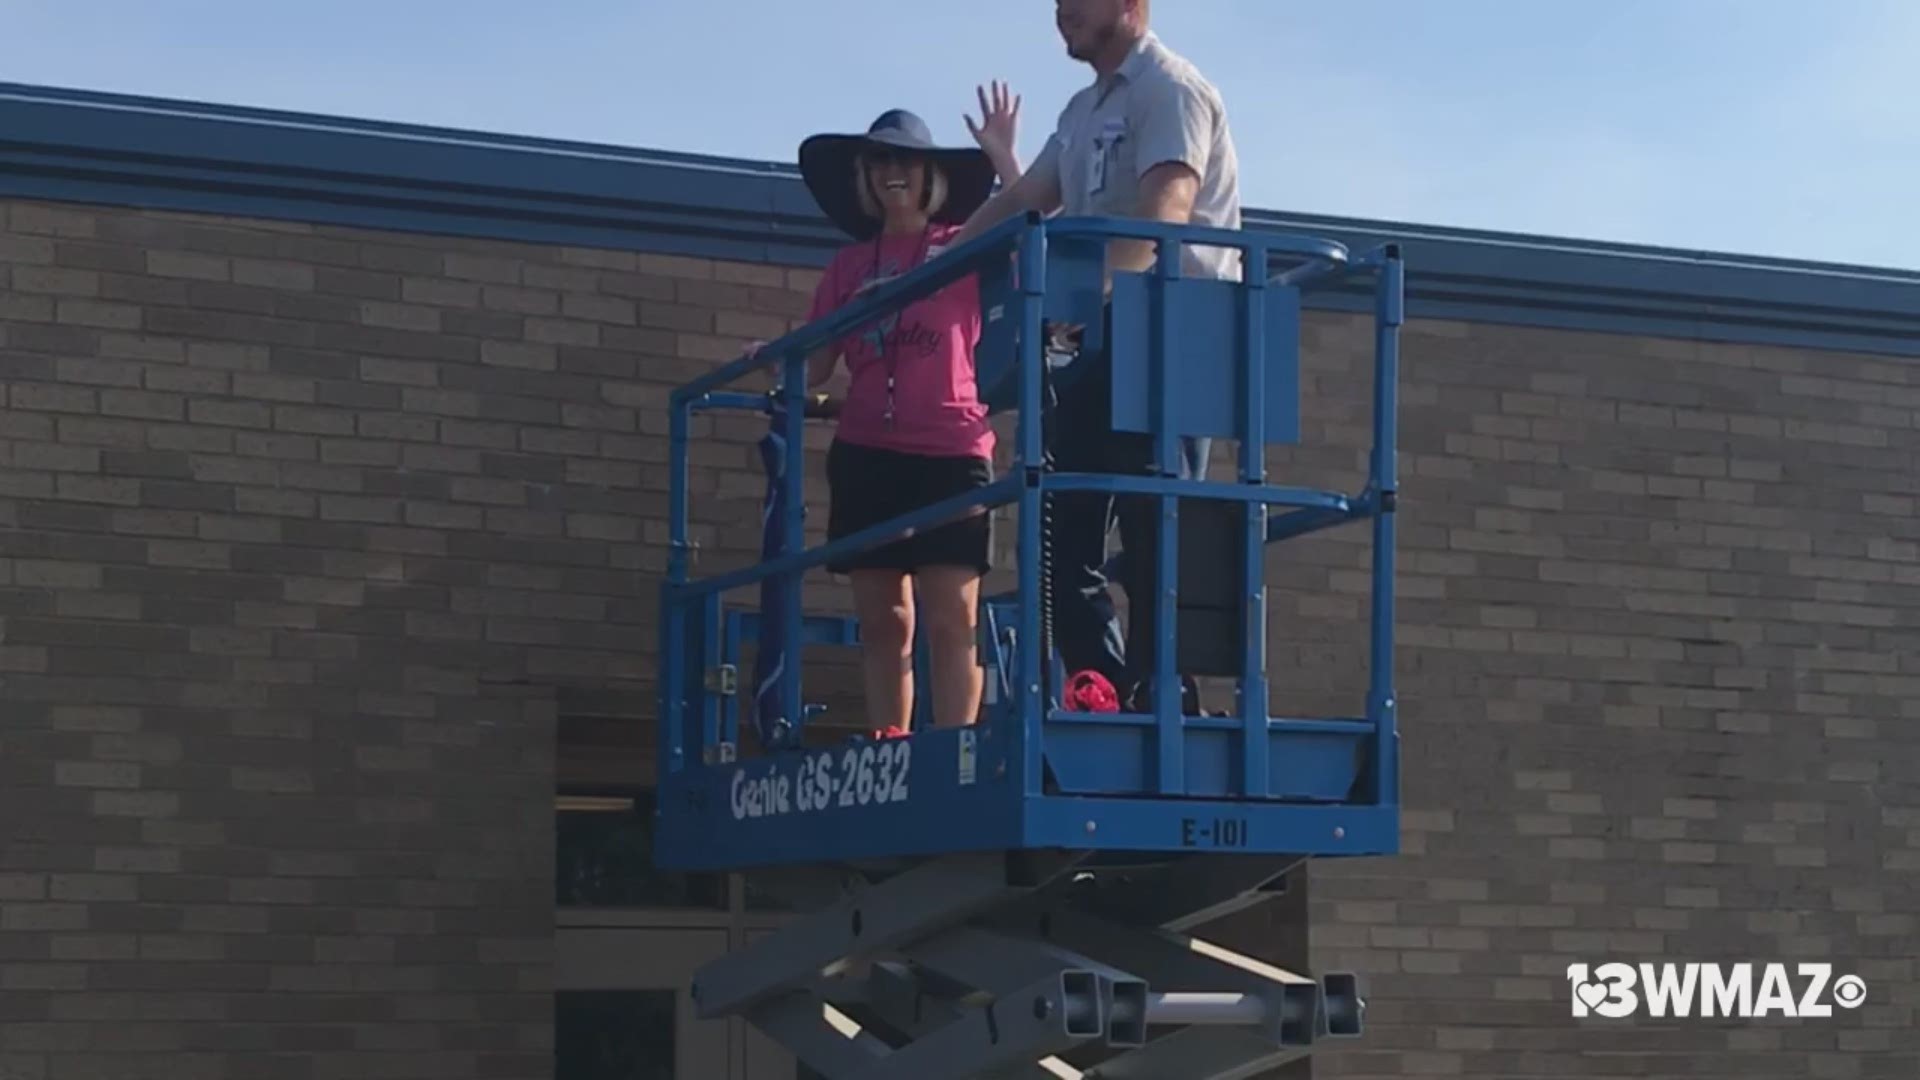 Quail Run principal Cheryl Thomas did her work on the roof Friday and students were able to watch